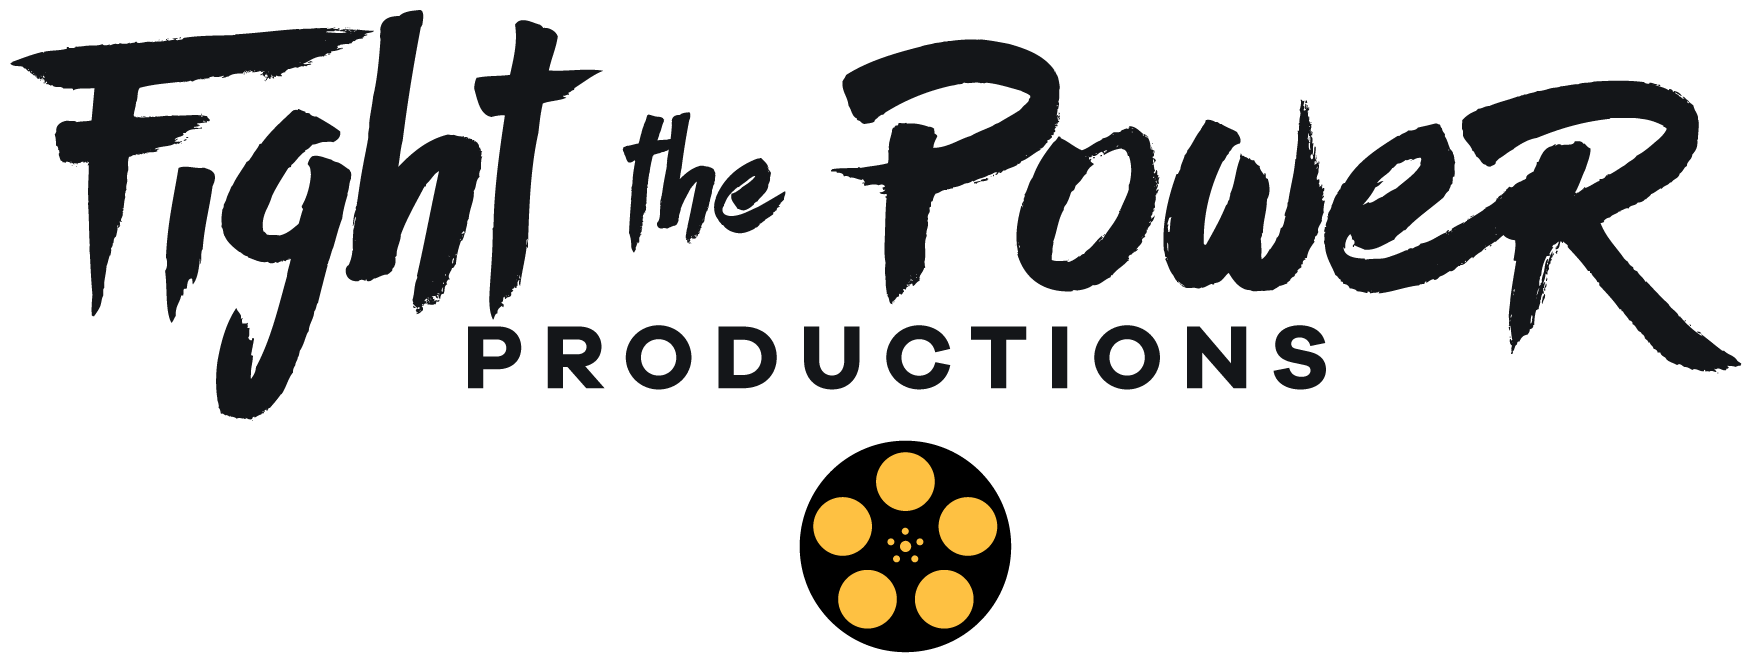 Fight the Power Productions